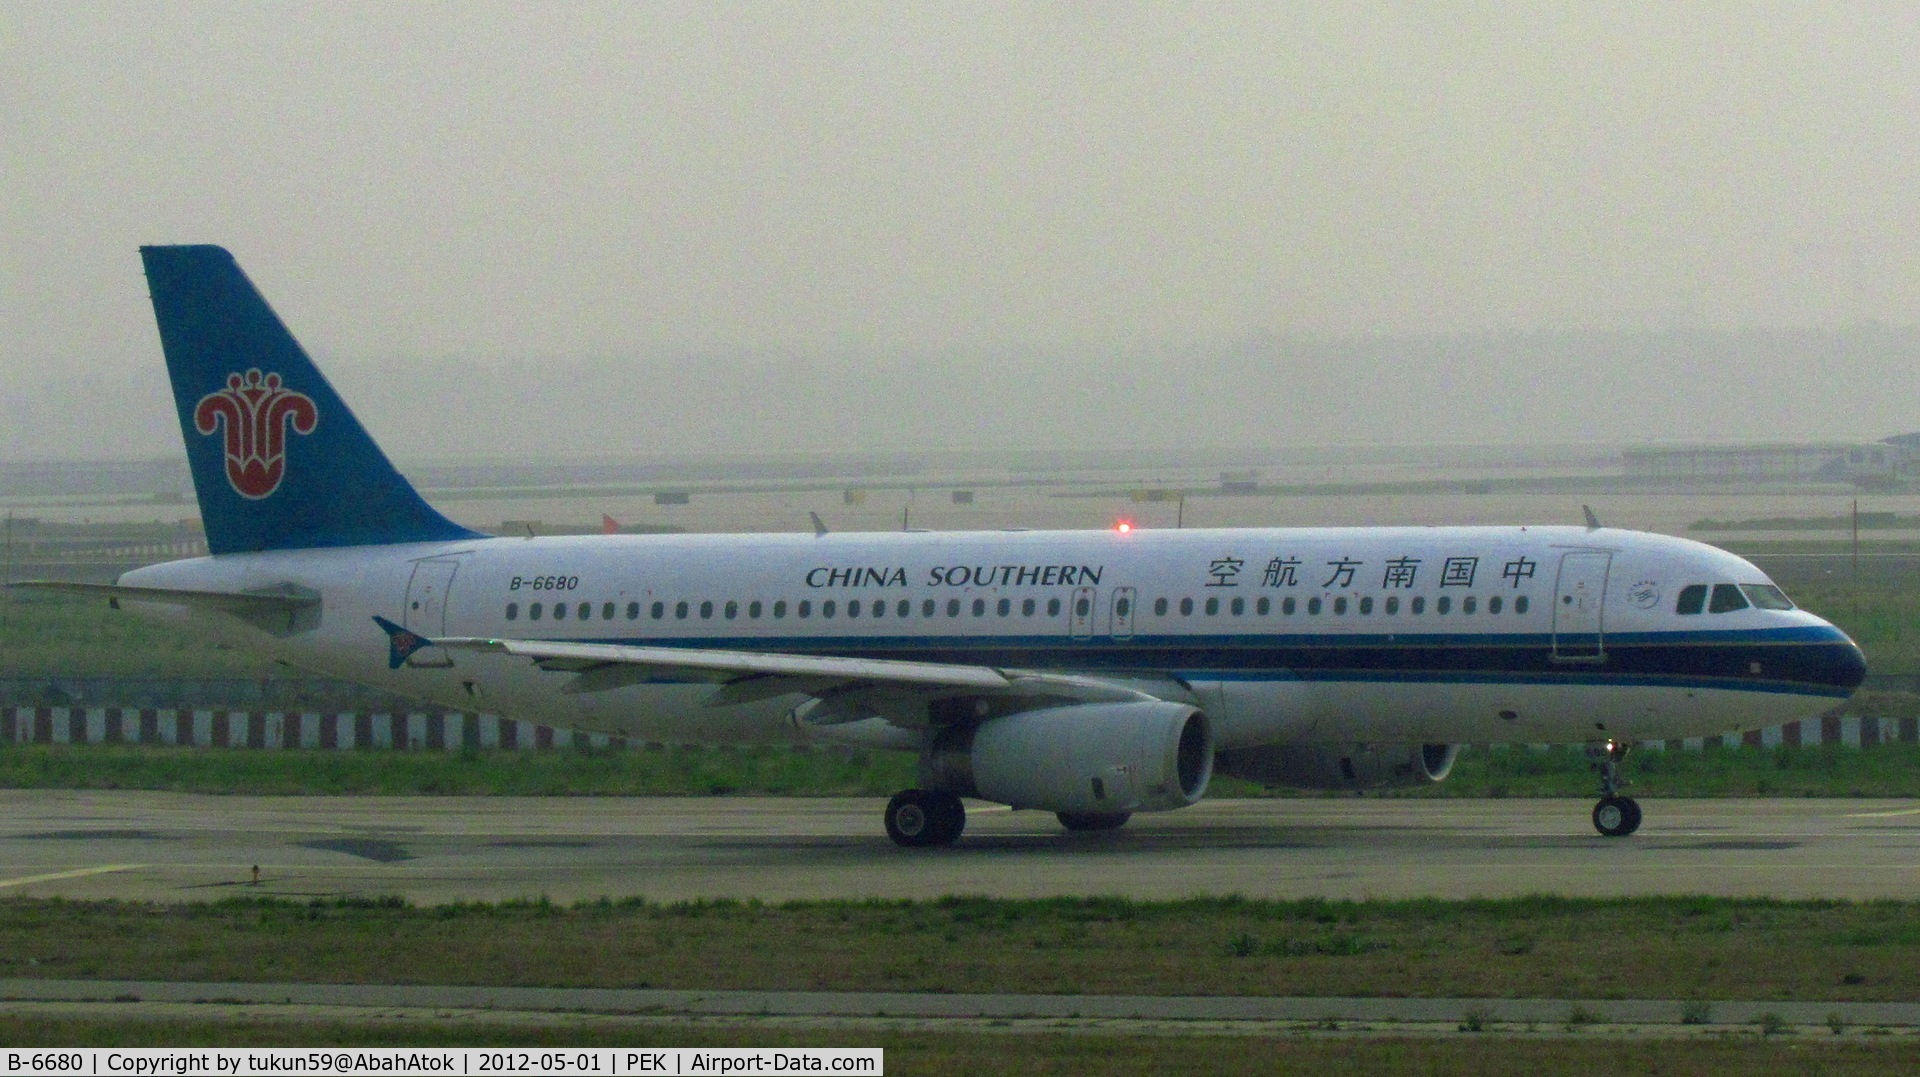 B-6680, 2010 Airbus A320-232 C/N 4279, China Southern Airlines